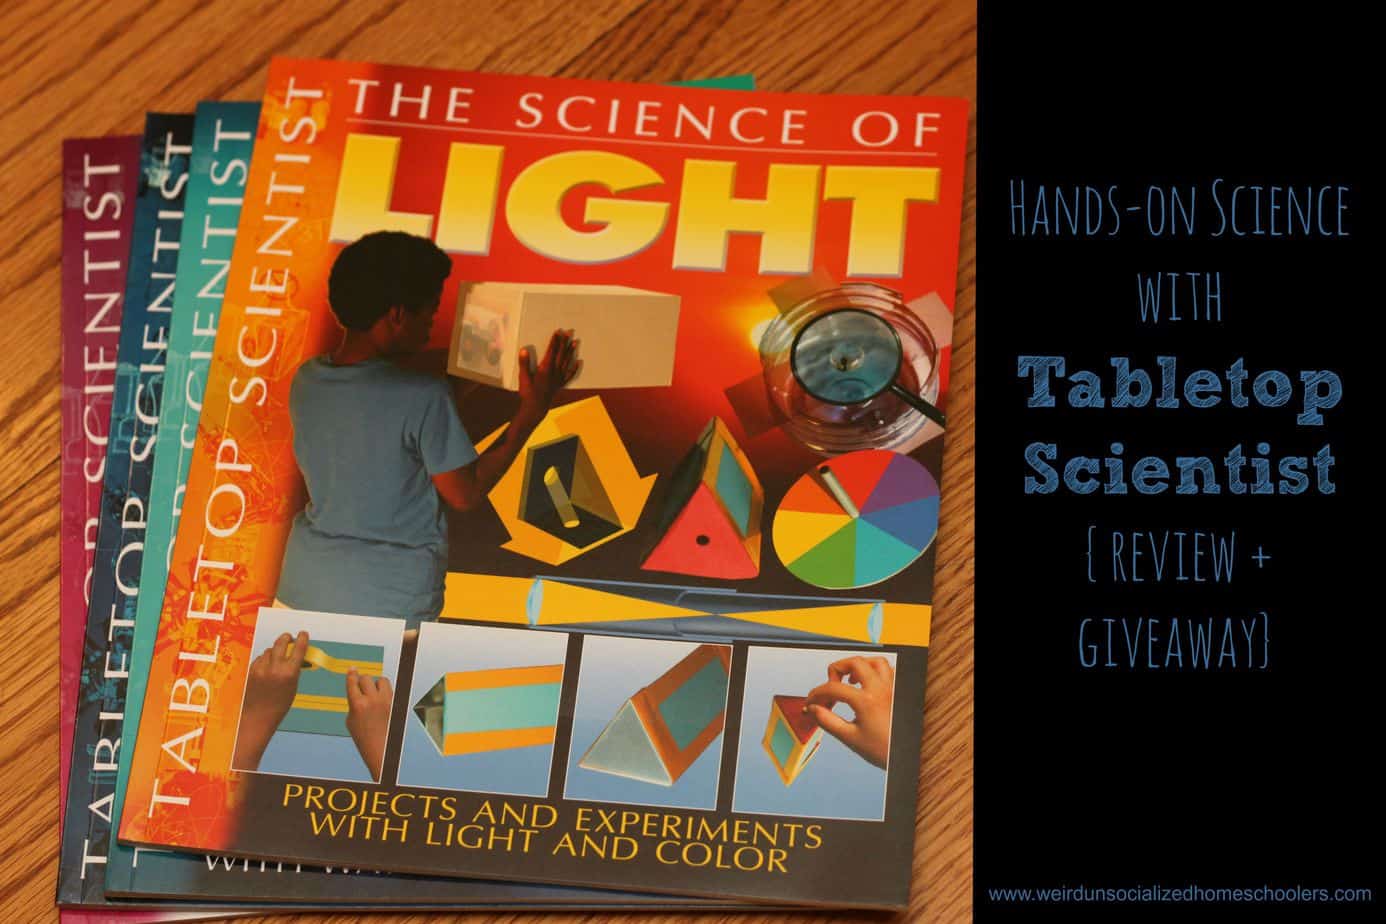 Hands-on Science with Tabletop Scientist {review + giveaway}